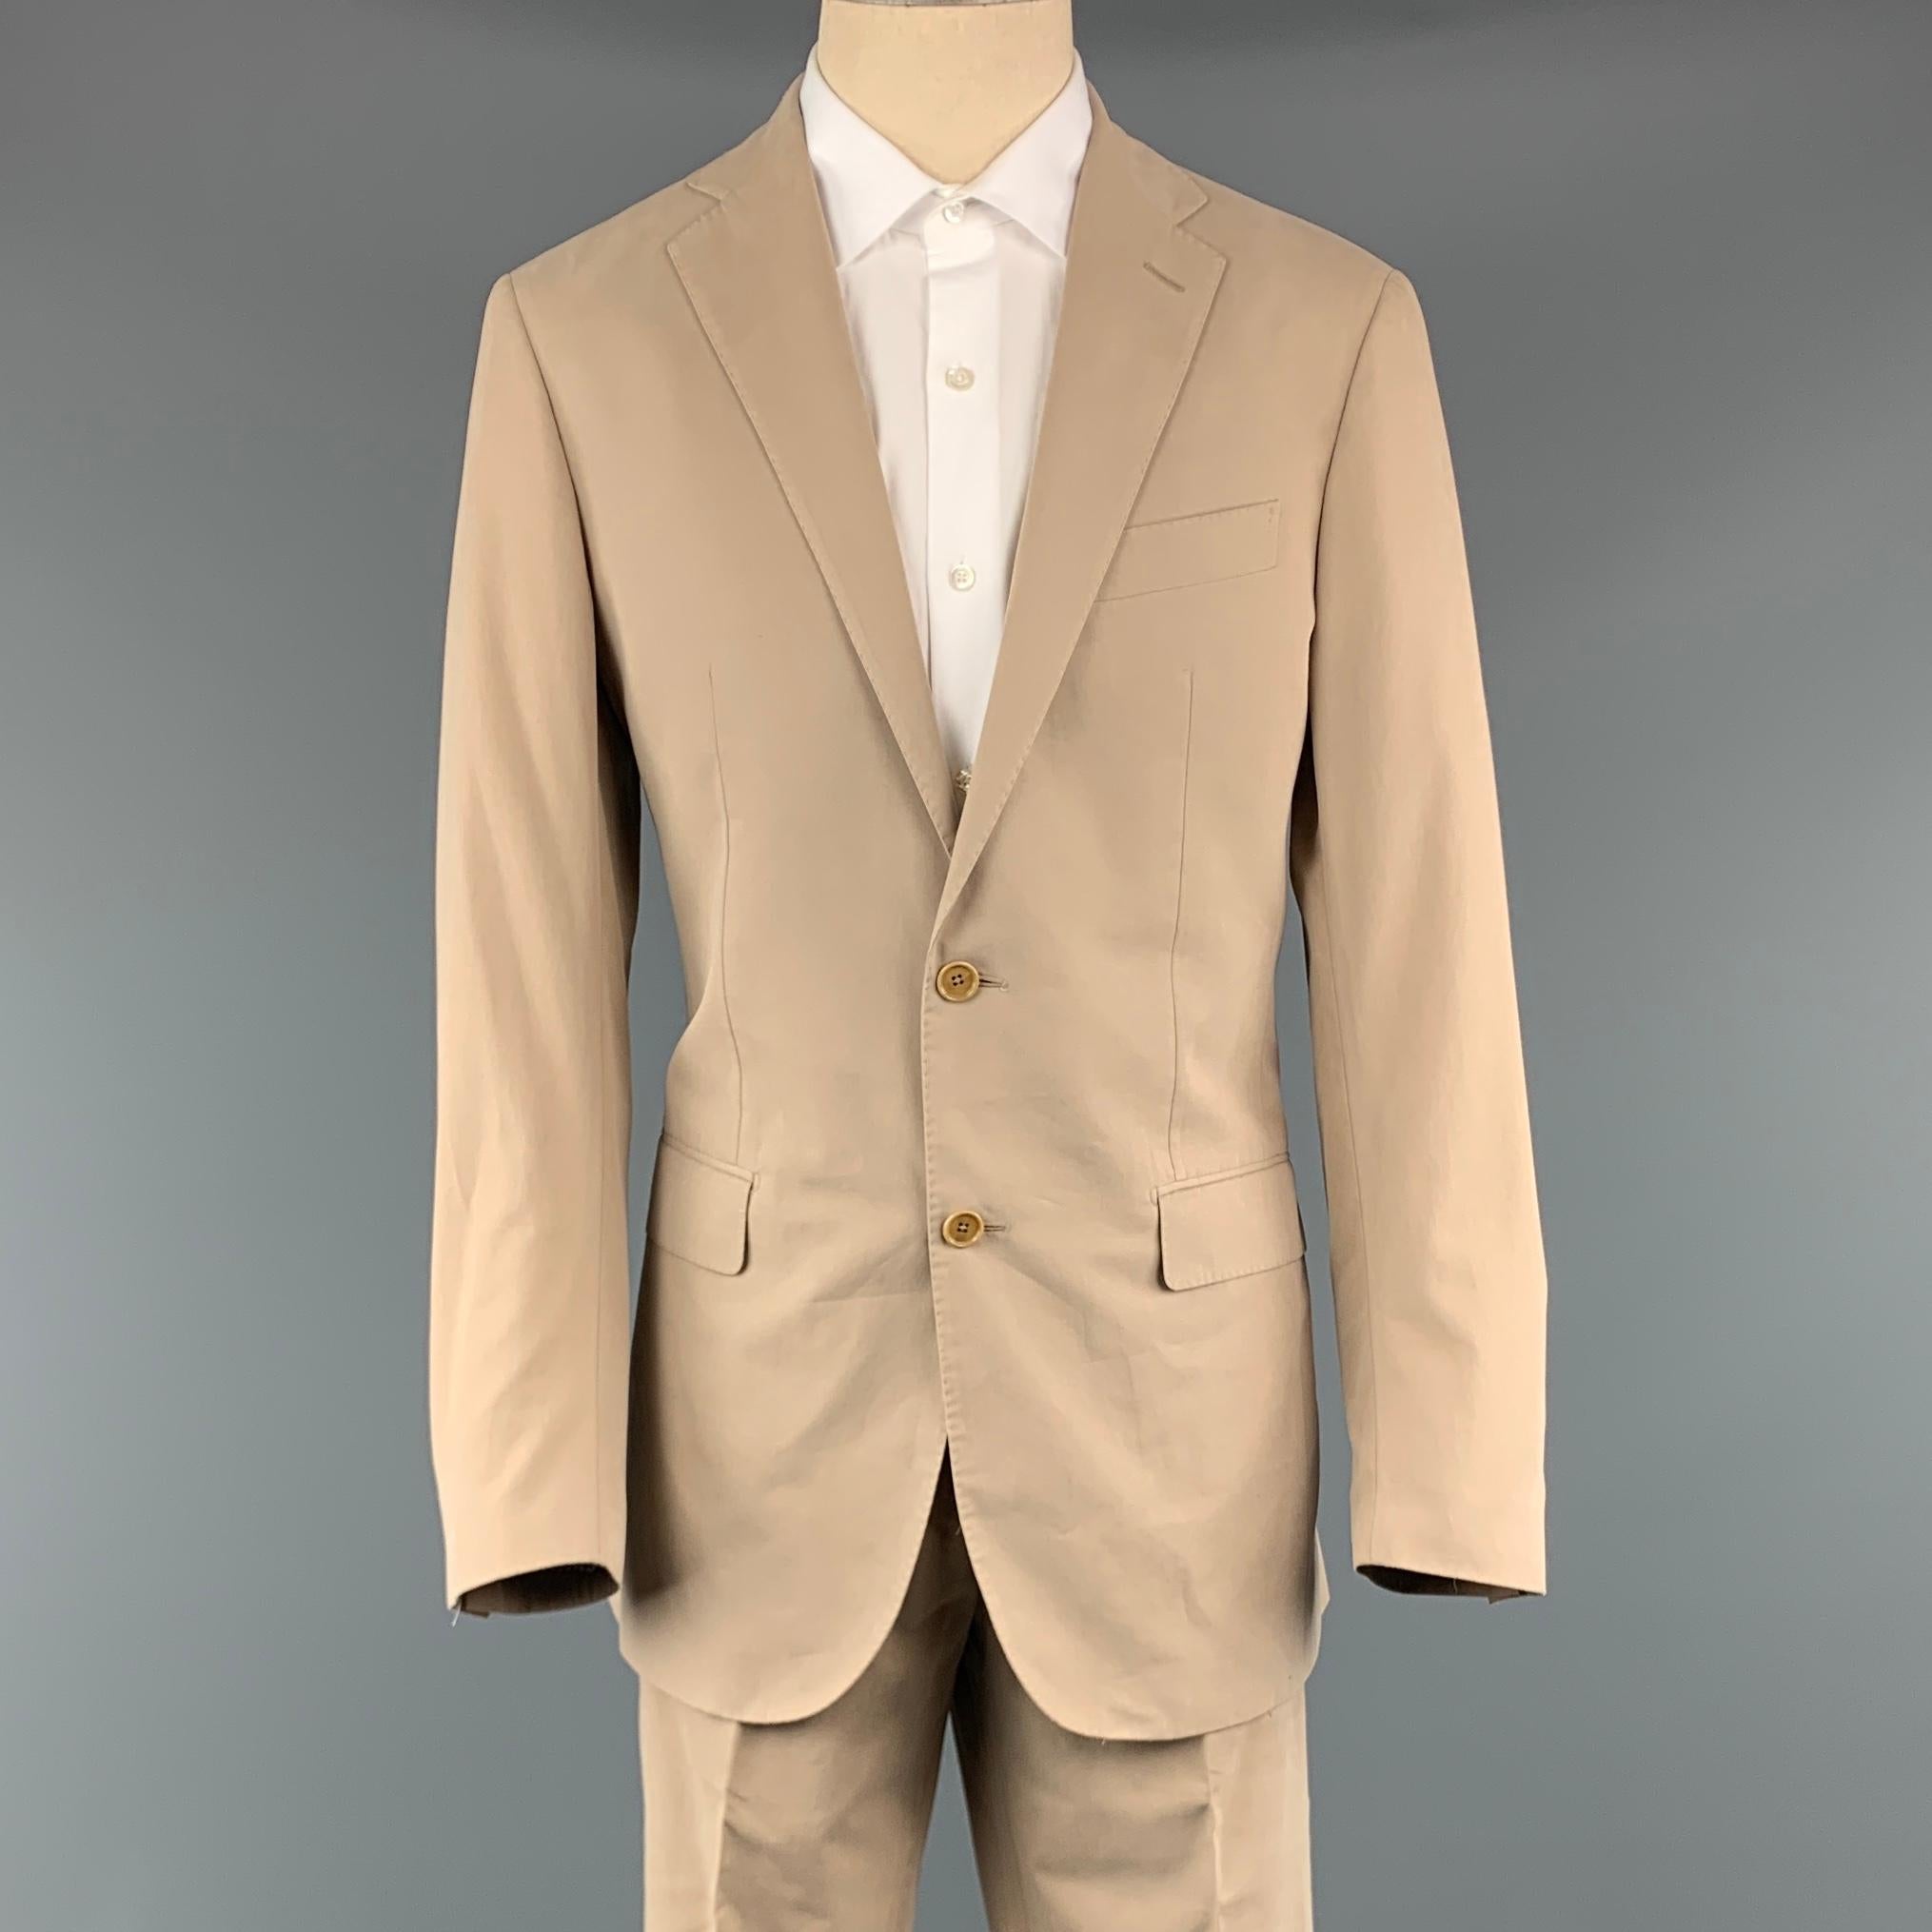 FACONNABLE suit comes in a khaki cotton and includes a single breasted, two button sport coat with notch lapel and matching front trousers.
 
Excellent Pre-Owned Condition.
Marked: 50
 
Measurements:
 
-Jacket
Shoulder: 18.5 in.
Chest: 40